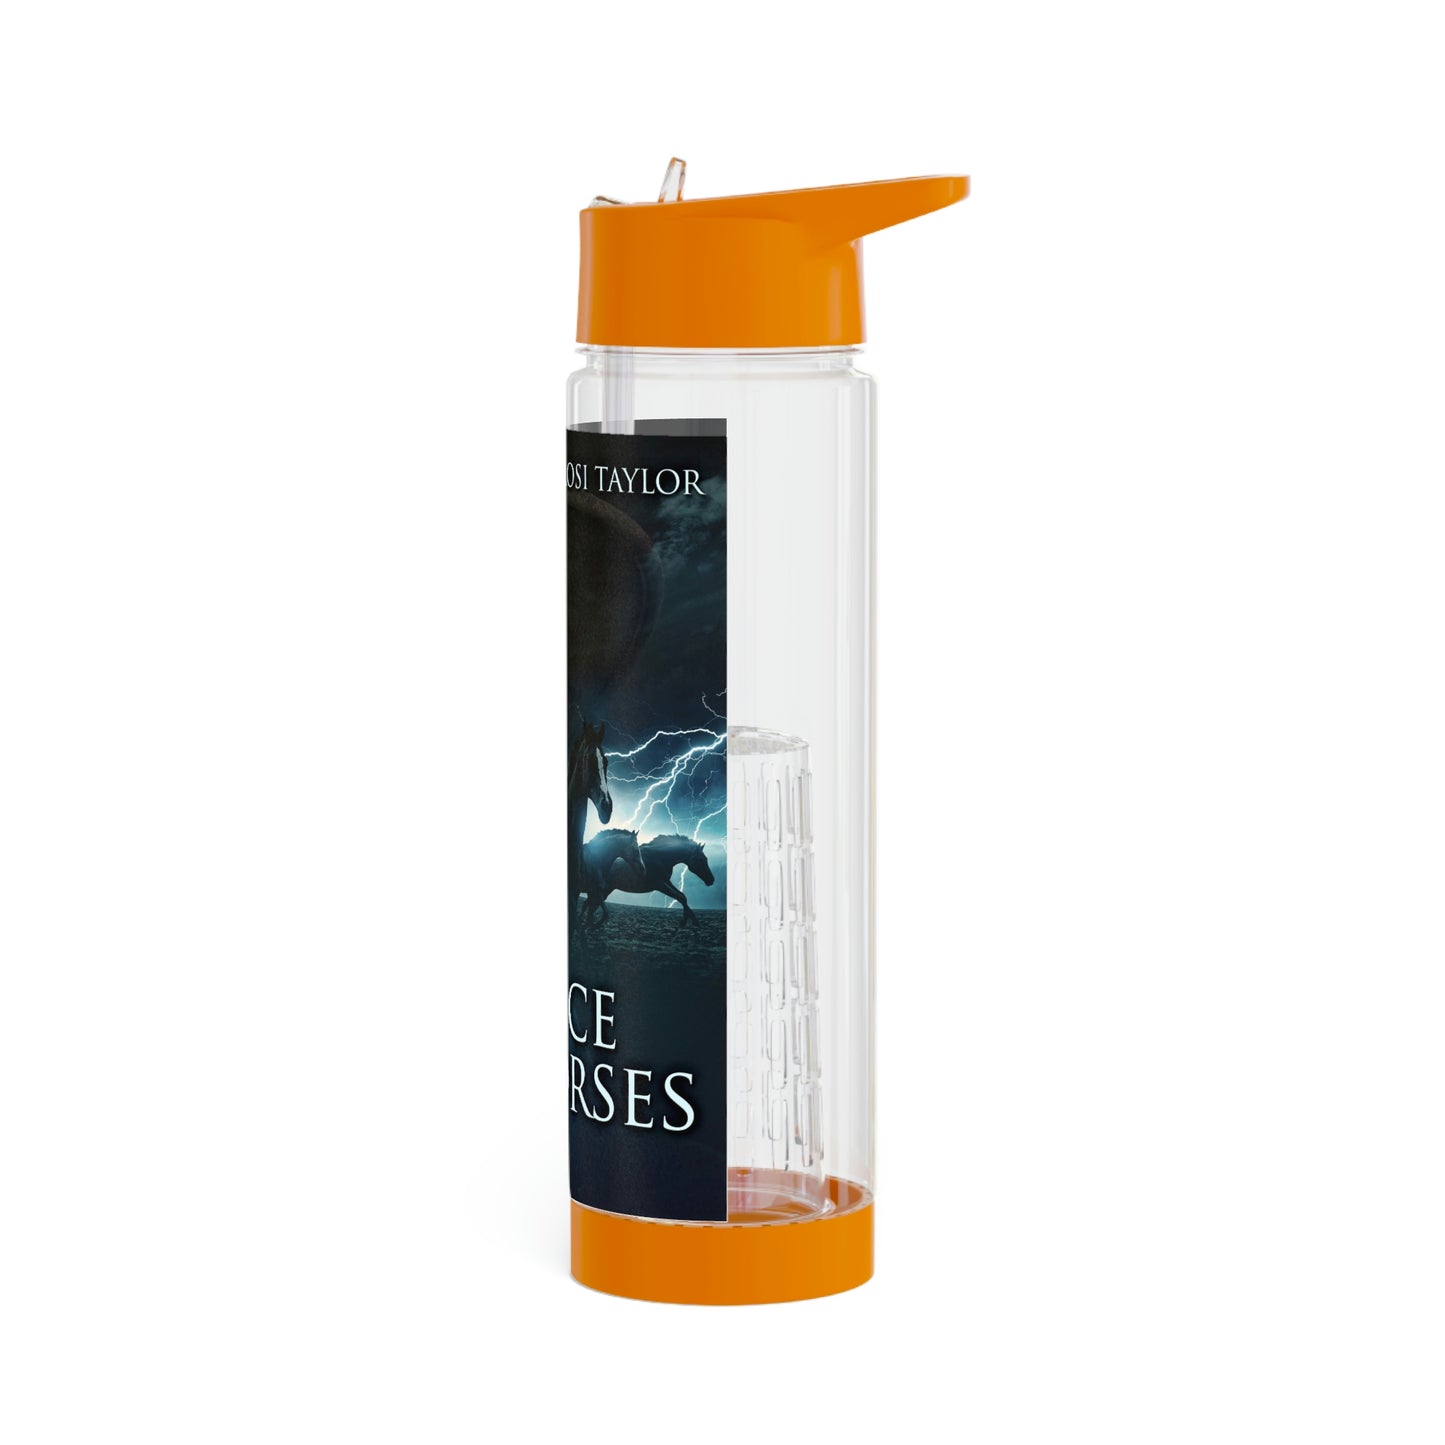 The Price Of Horses - Infuser Water Bottle